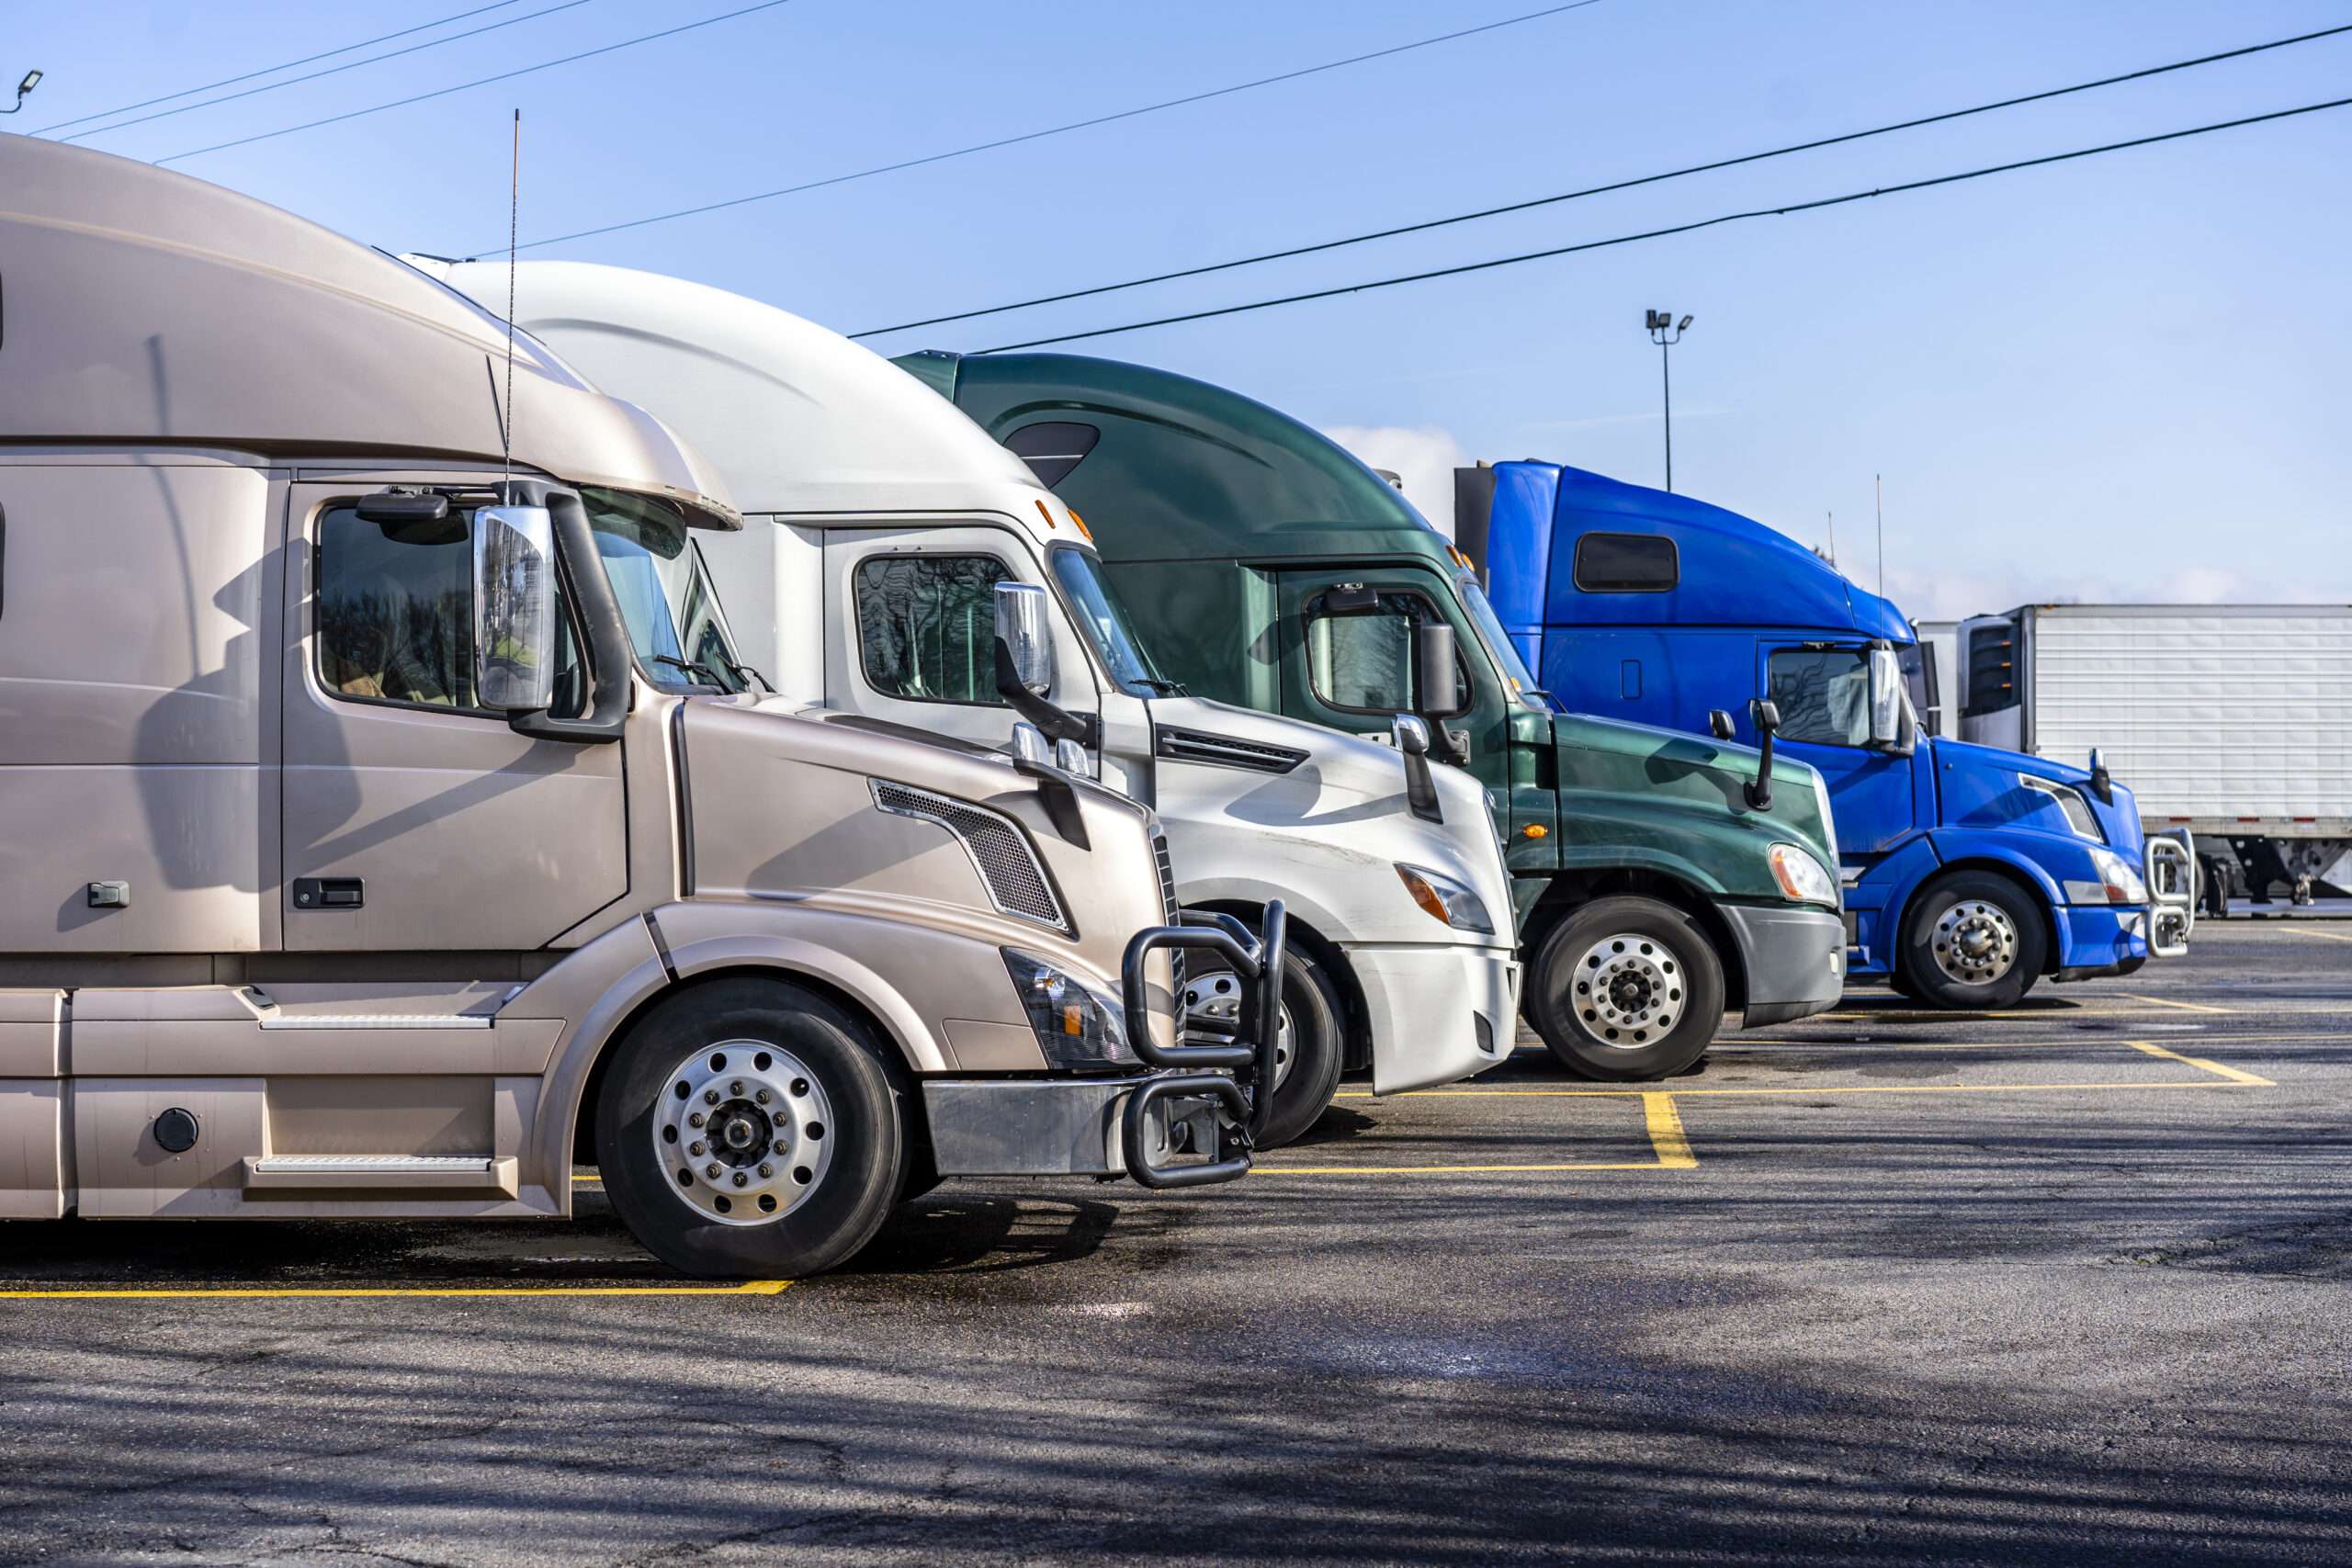 The federal government's plan to track truckers' every movement is a privacy nightmare